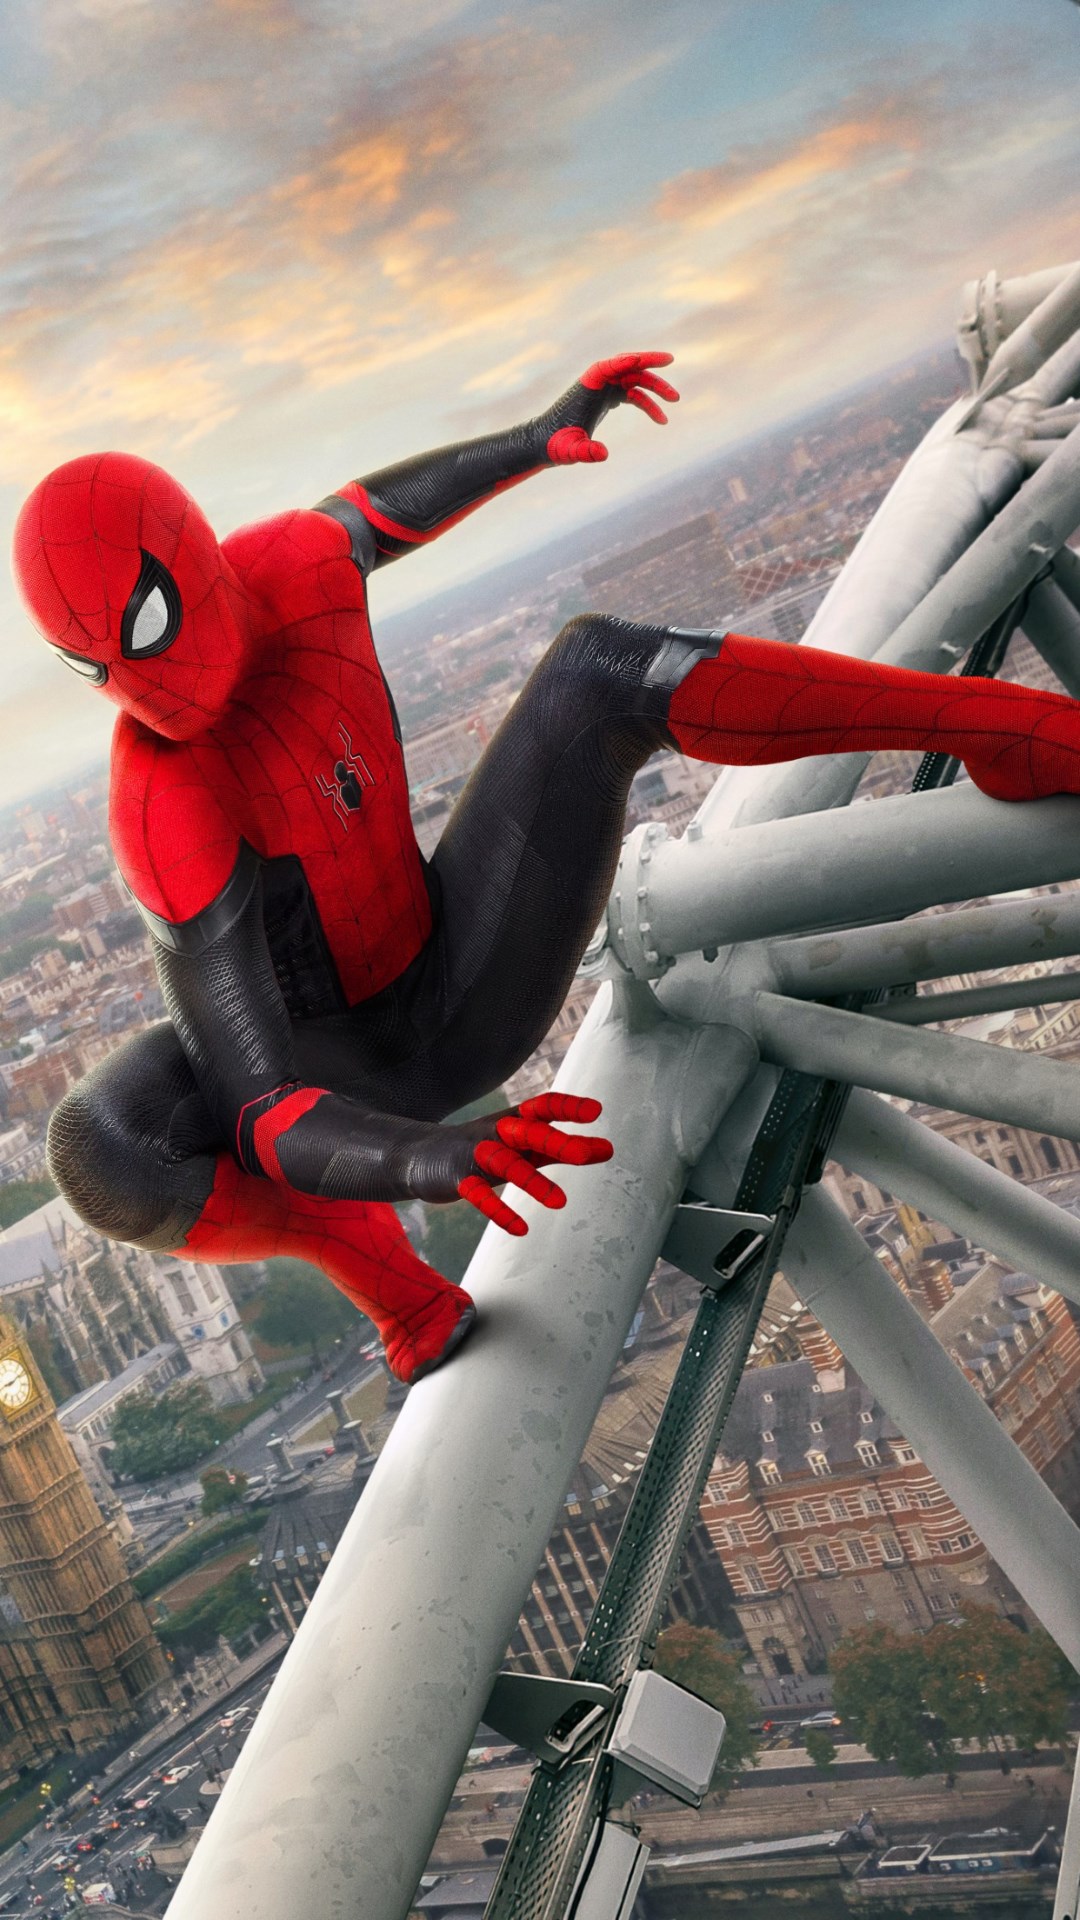 for mac download Spider-Man: Far From Home